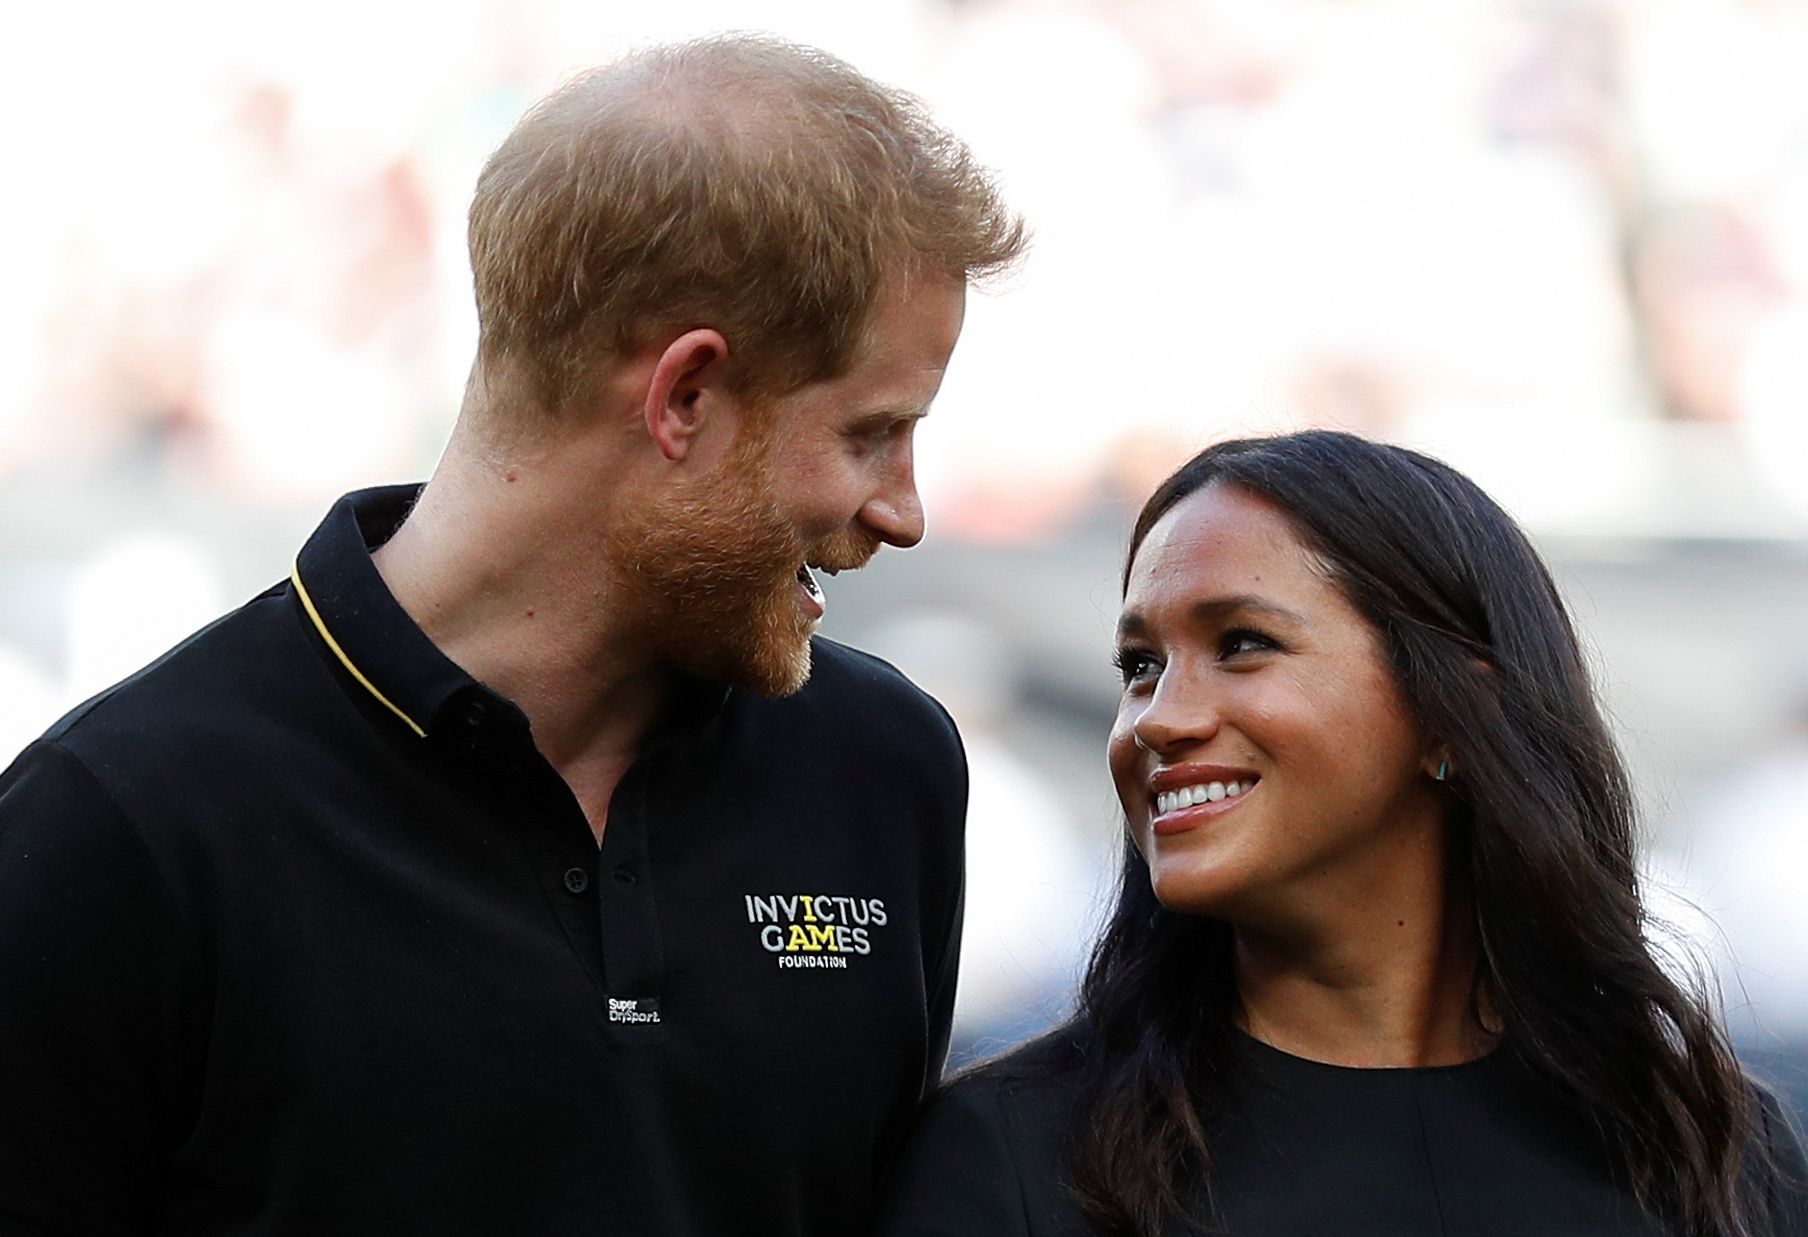 The Duke Of Sussex Attends The Boston Red Sox VS New York Yankees Baseball Game